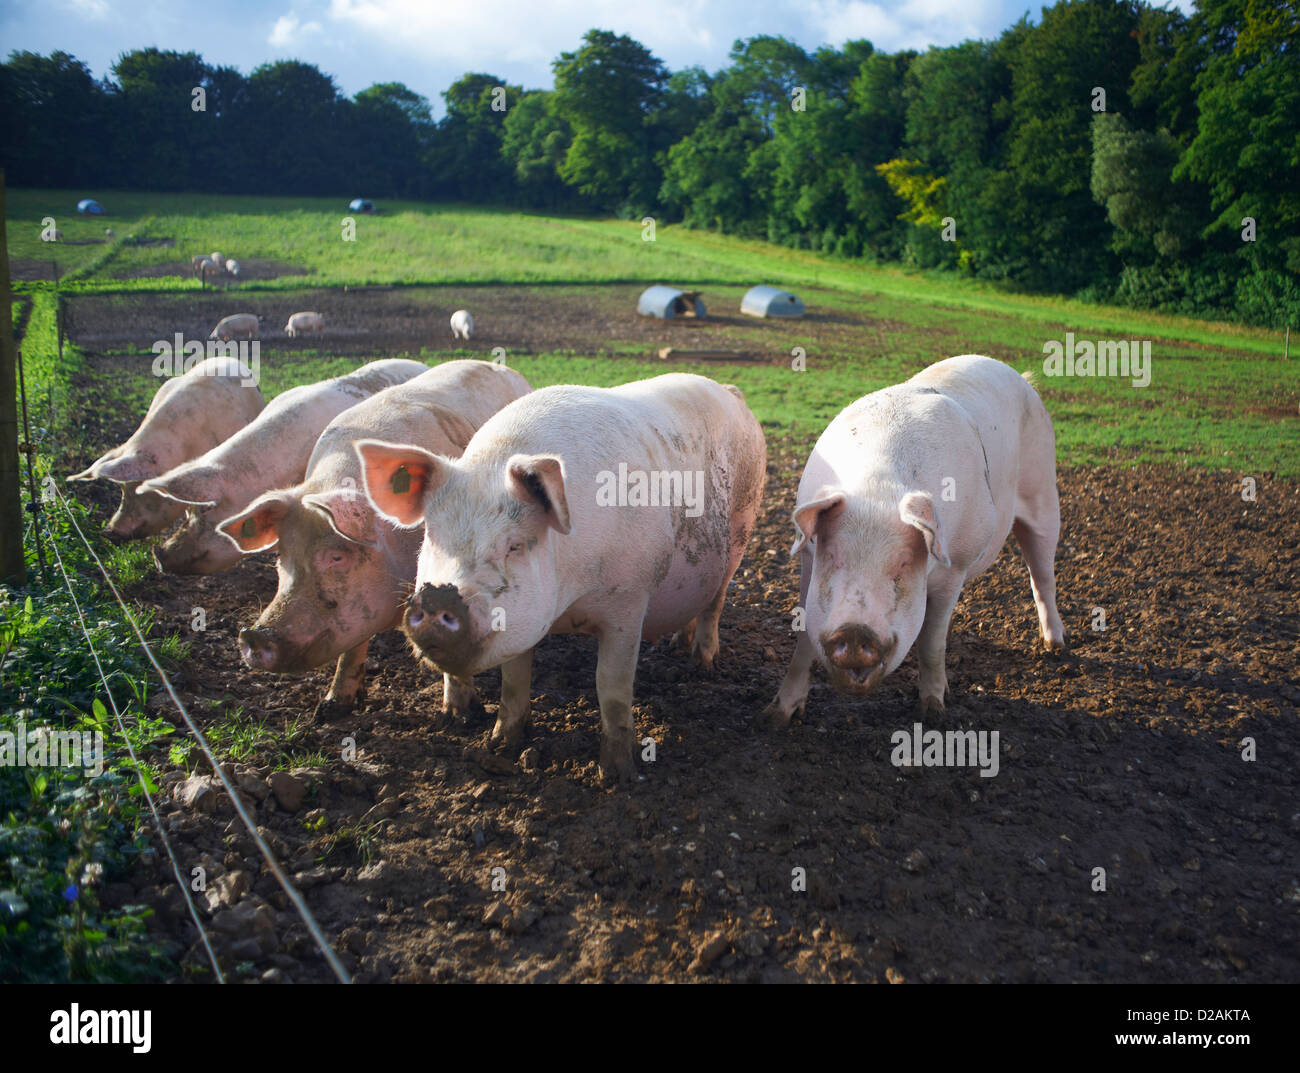 Pigs rooting in dirt field Stock Photo